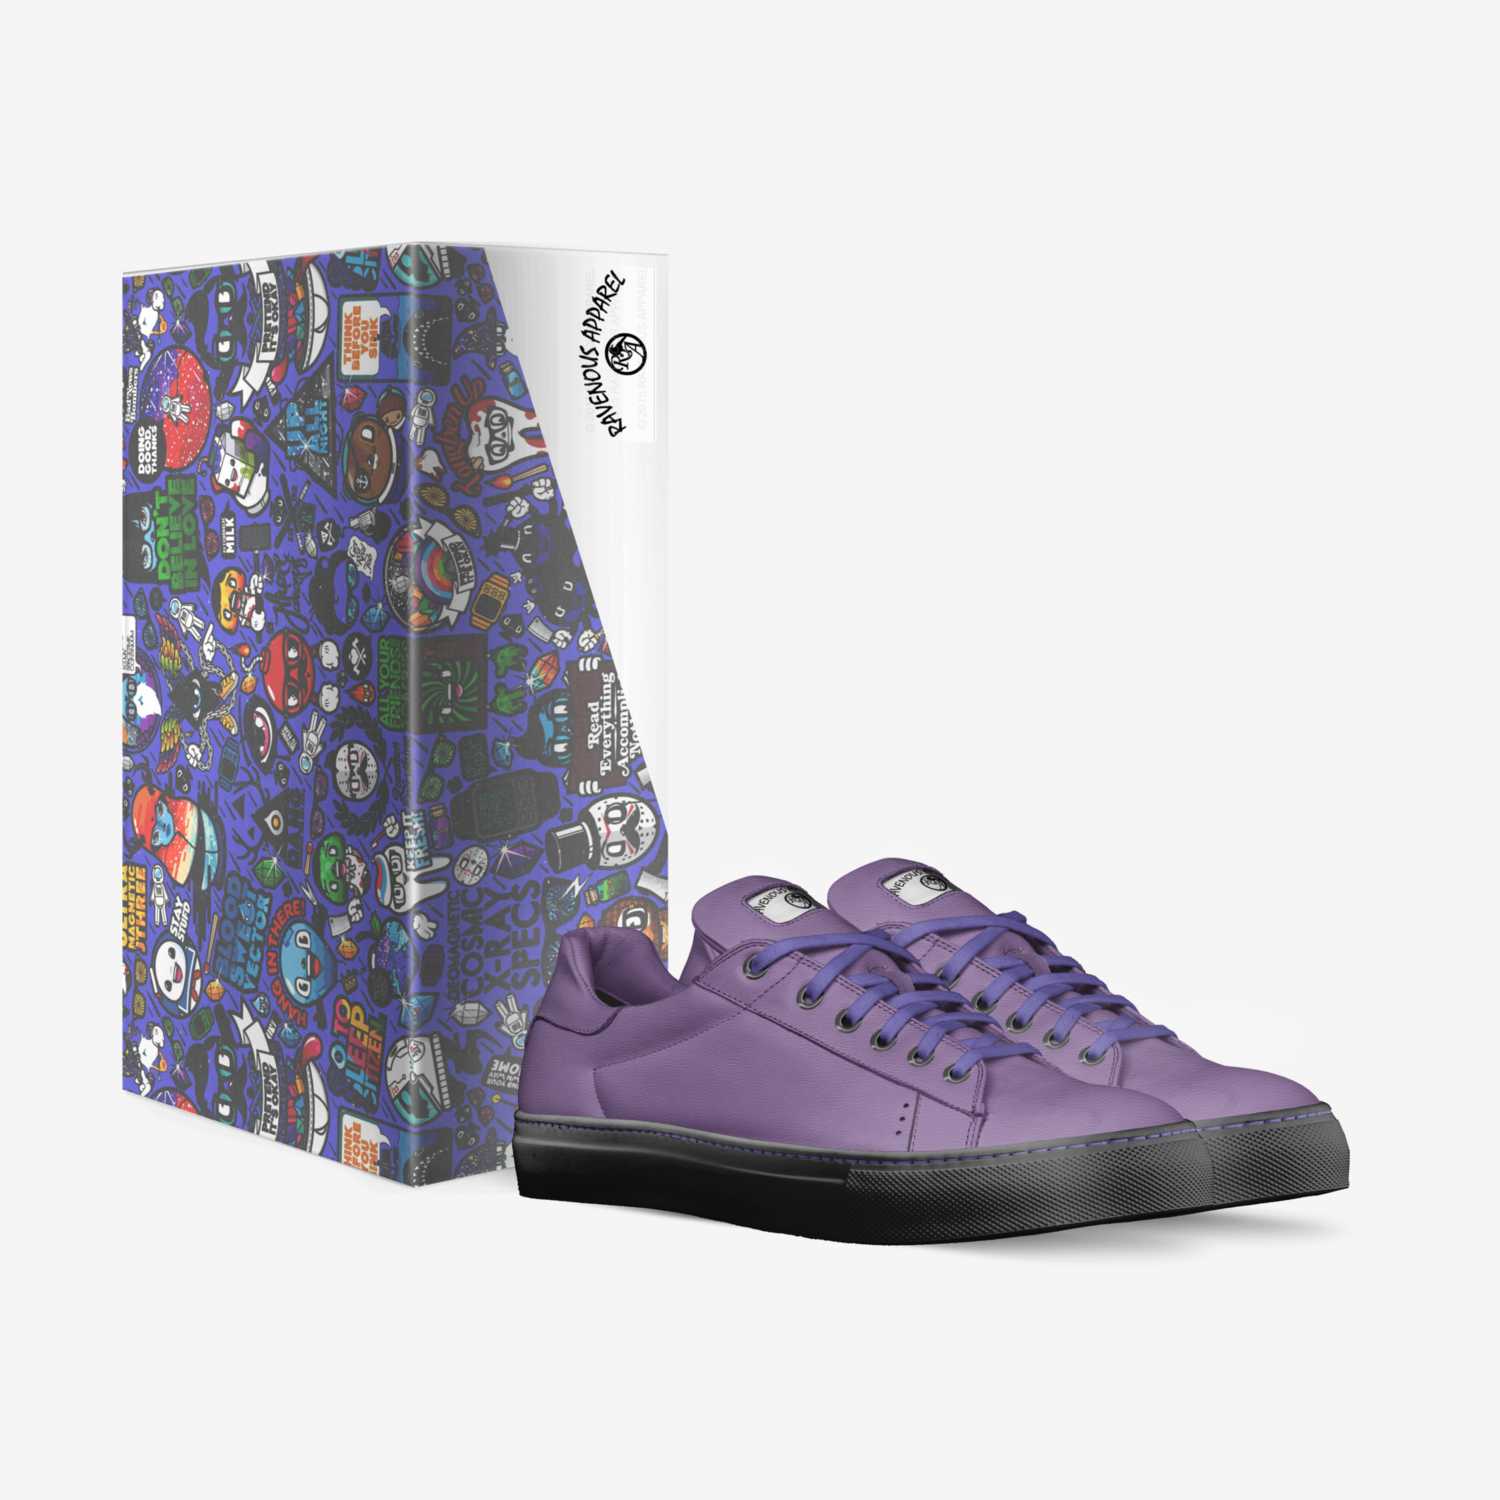 RavePurps custom made in Italy shoes by Thomas Rodriguez | Box view